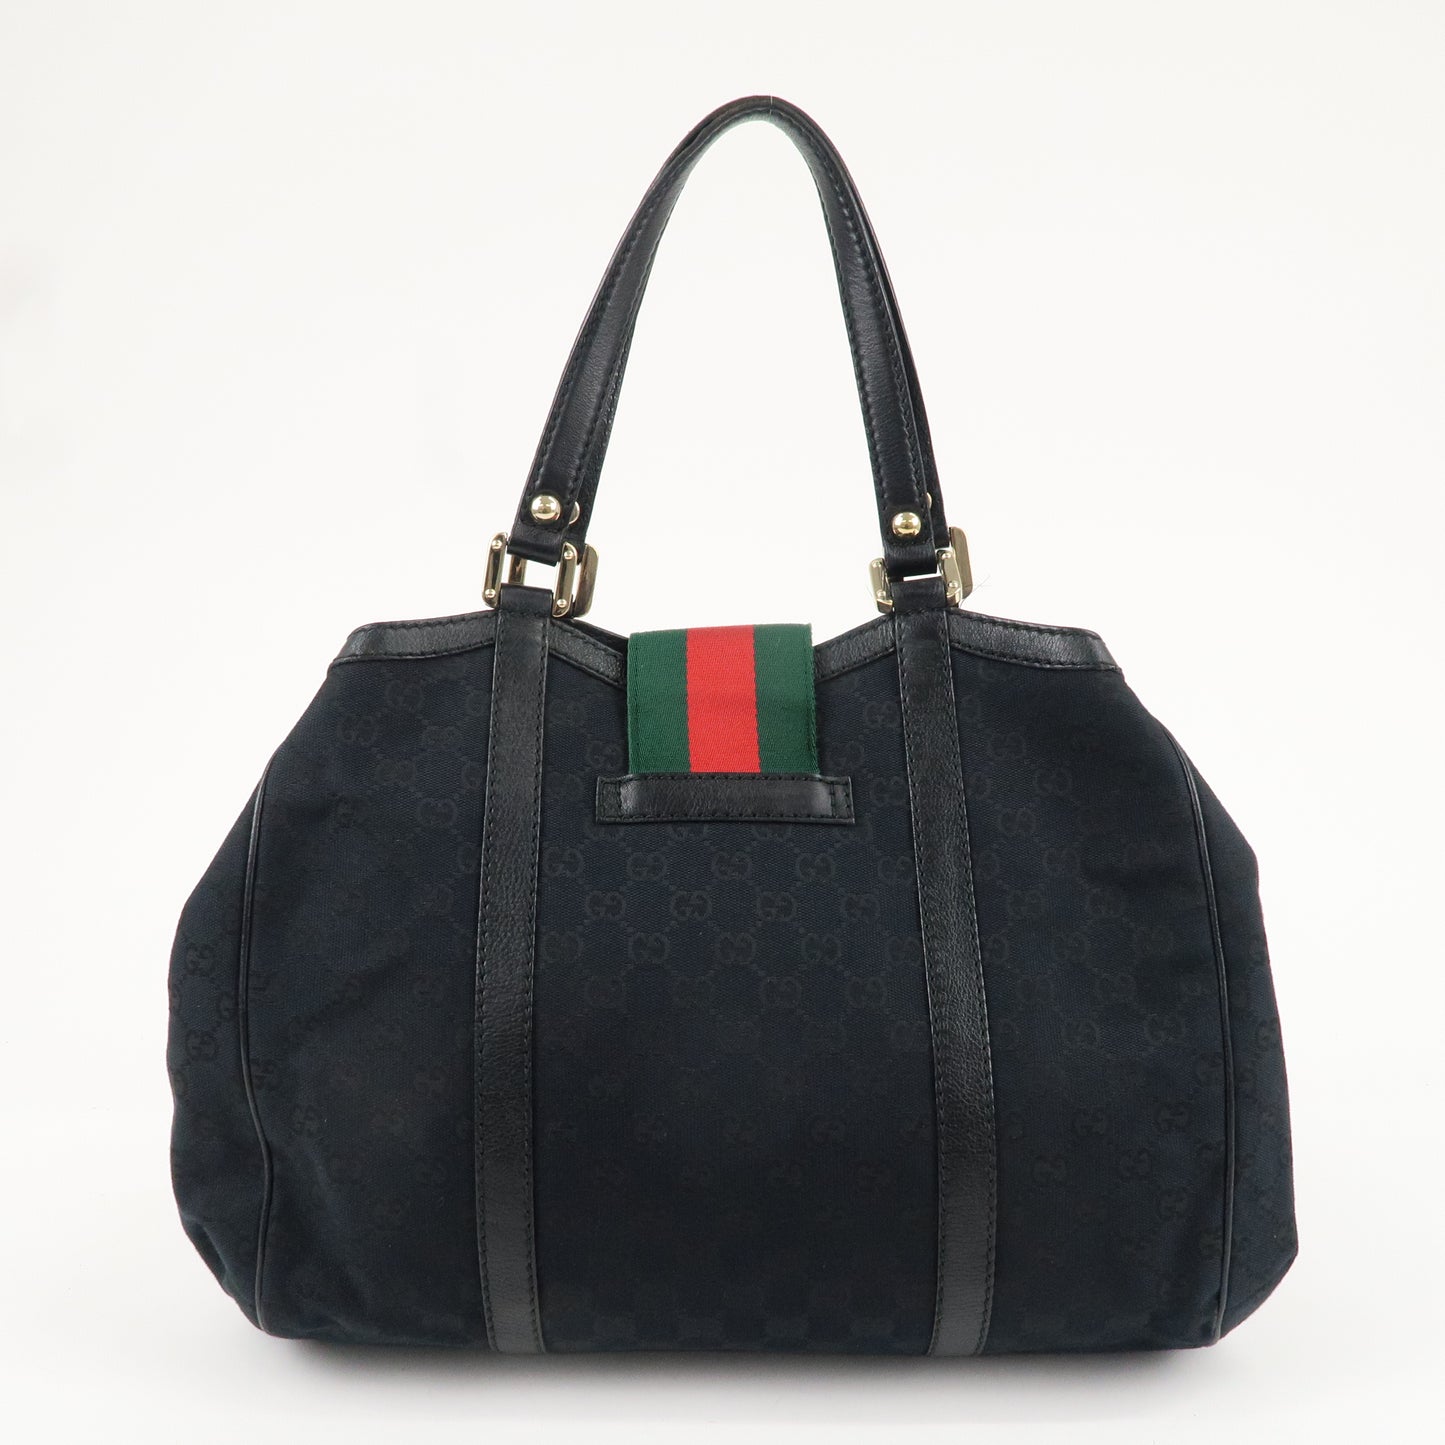 GUCCI Sherry GG Canvas Leather Hand Bag Black 233609